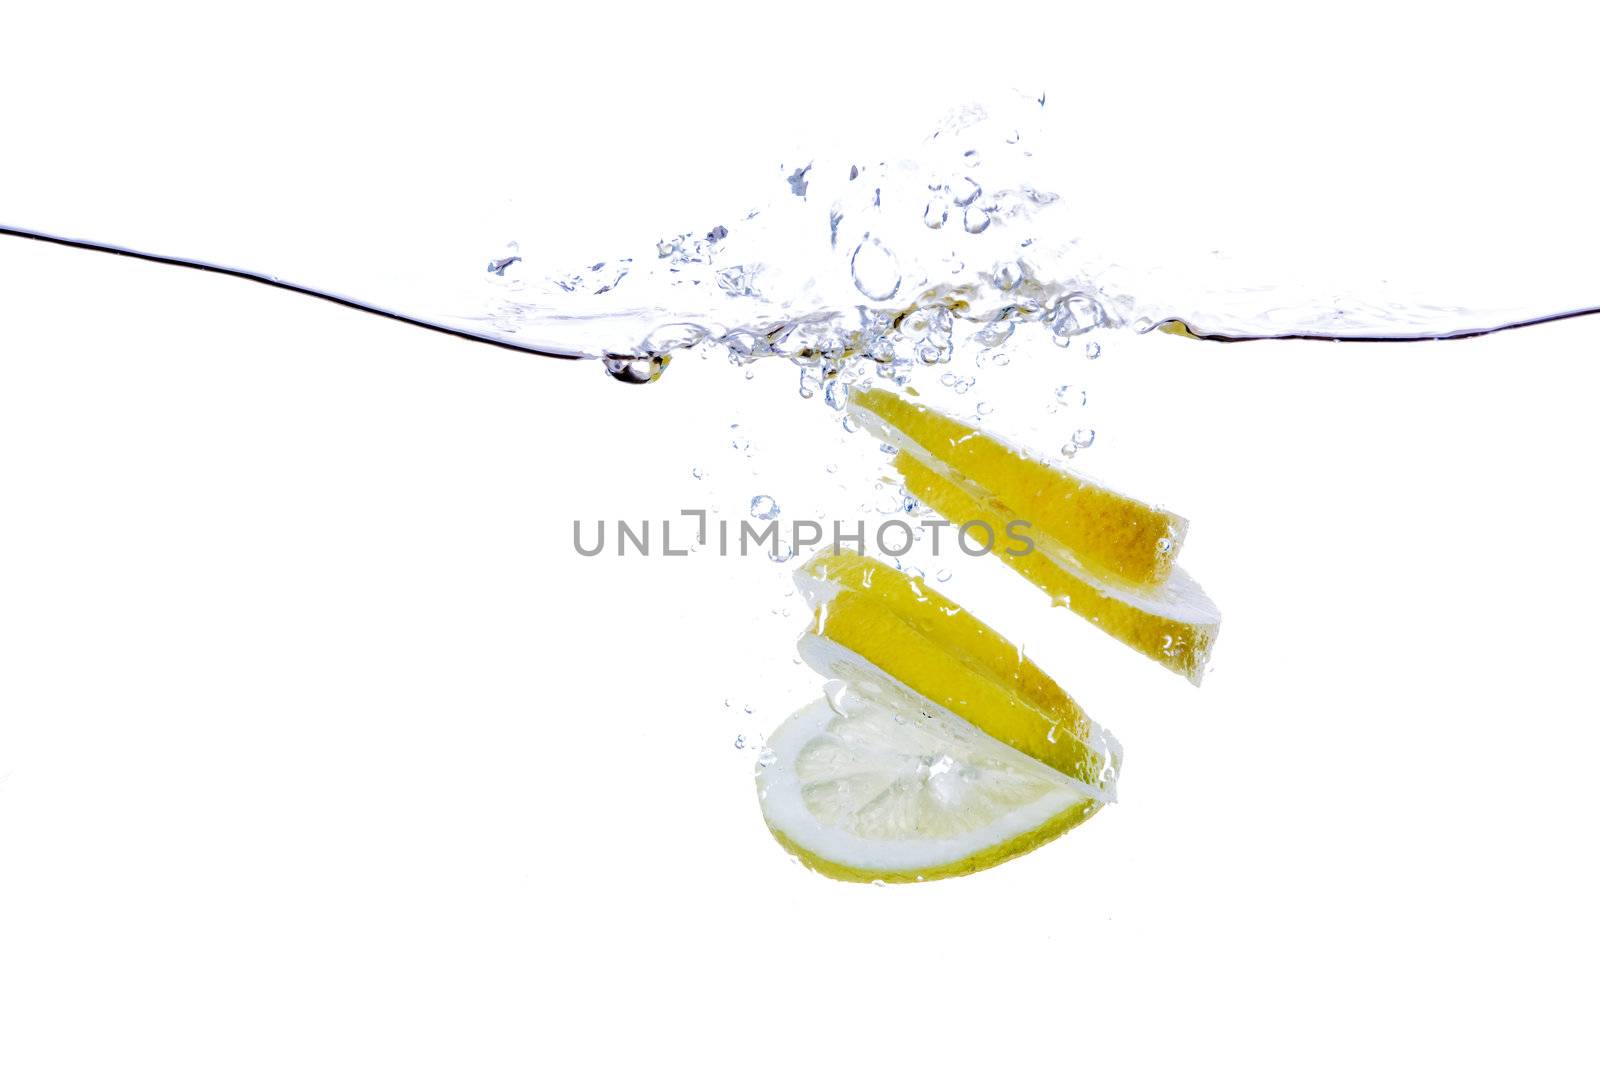 A group of lemon slices dropped in water with bubbles